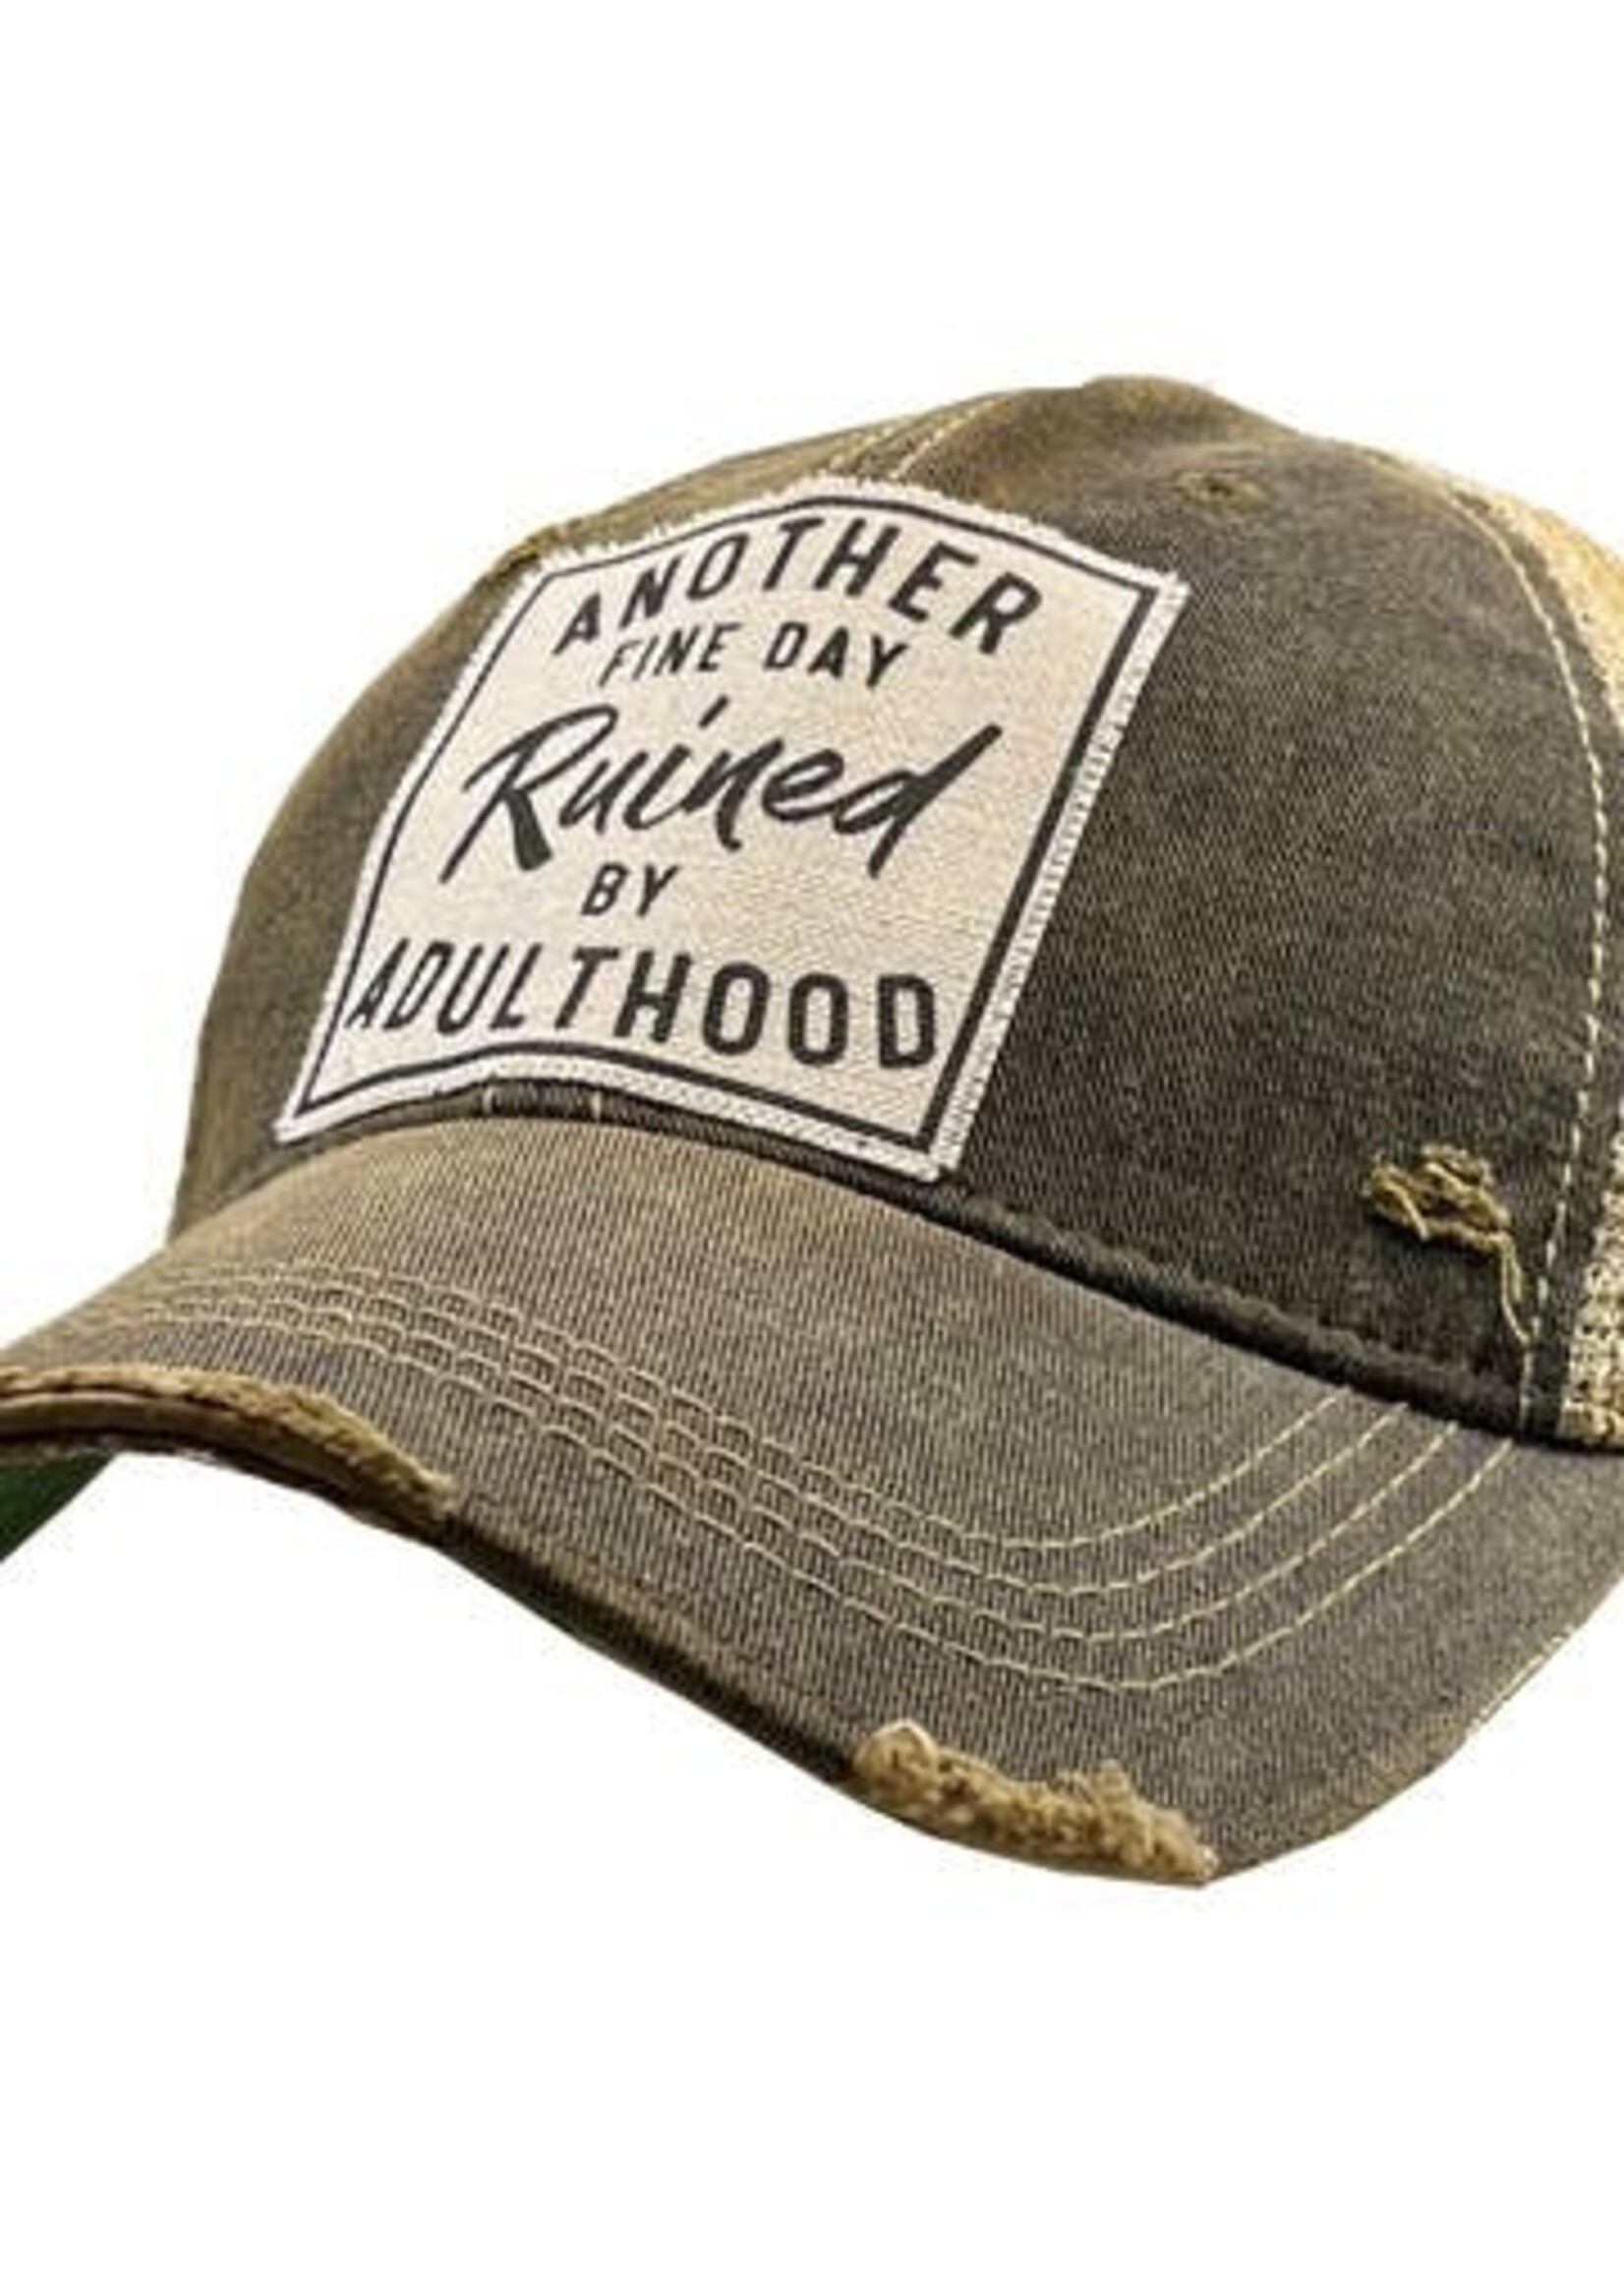 VINTAGE LIFE VIN TRUCKER HAT ANOTHER FINE DAY RUINED BY ADULTHOOD